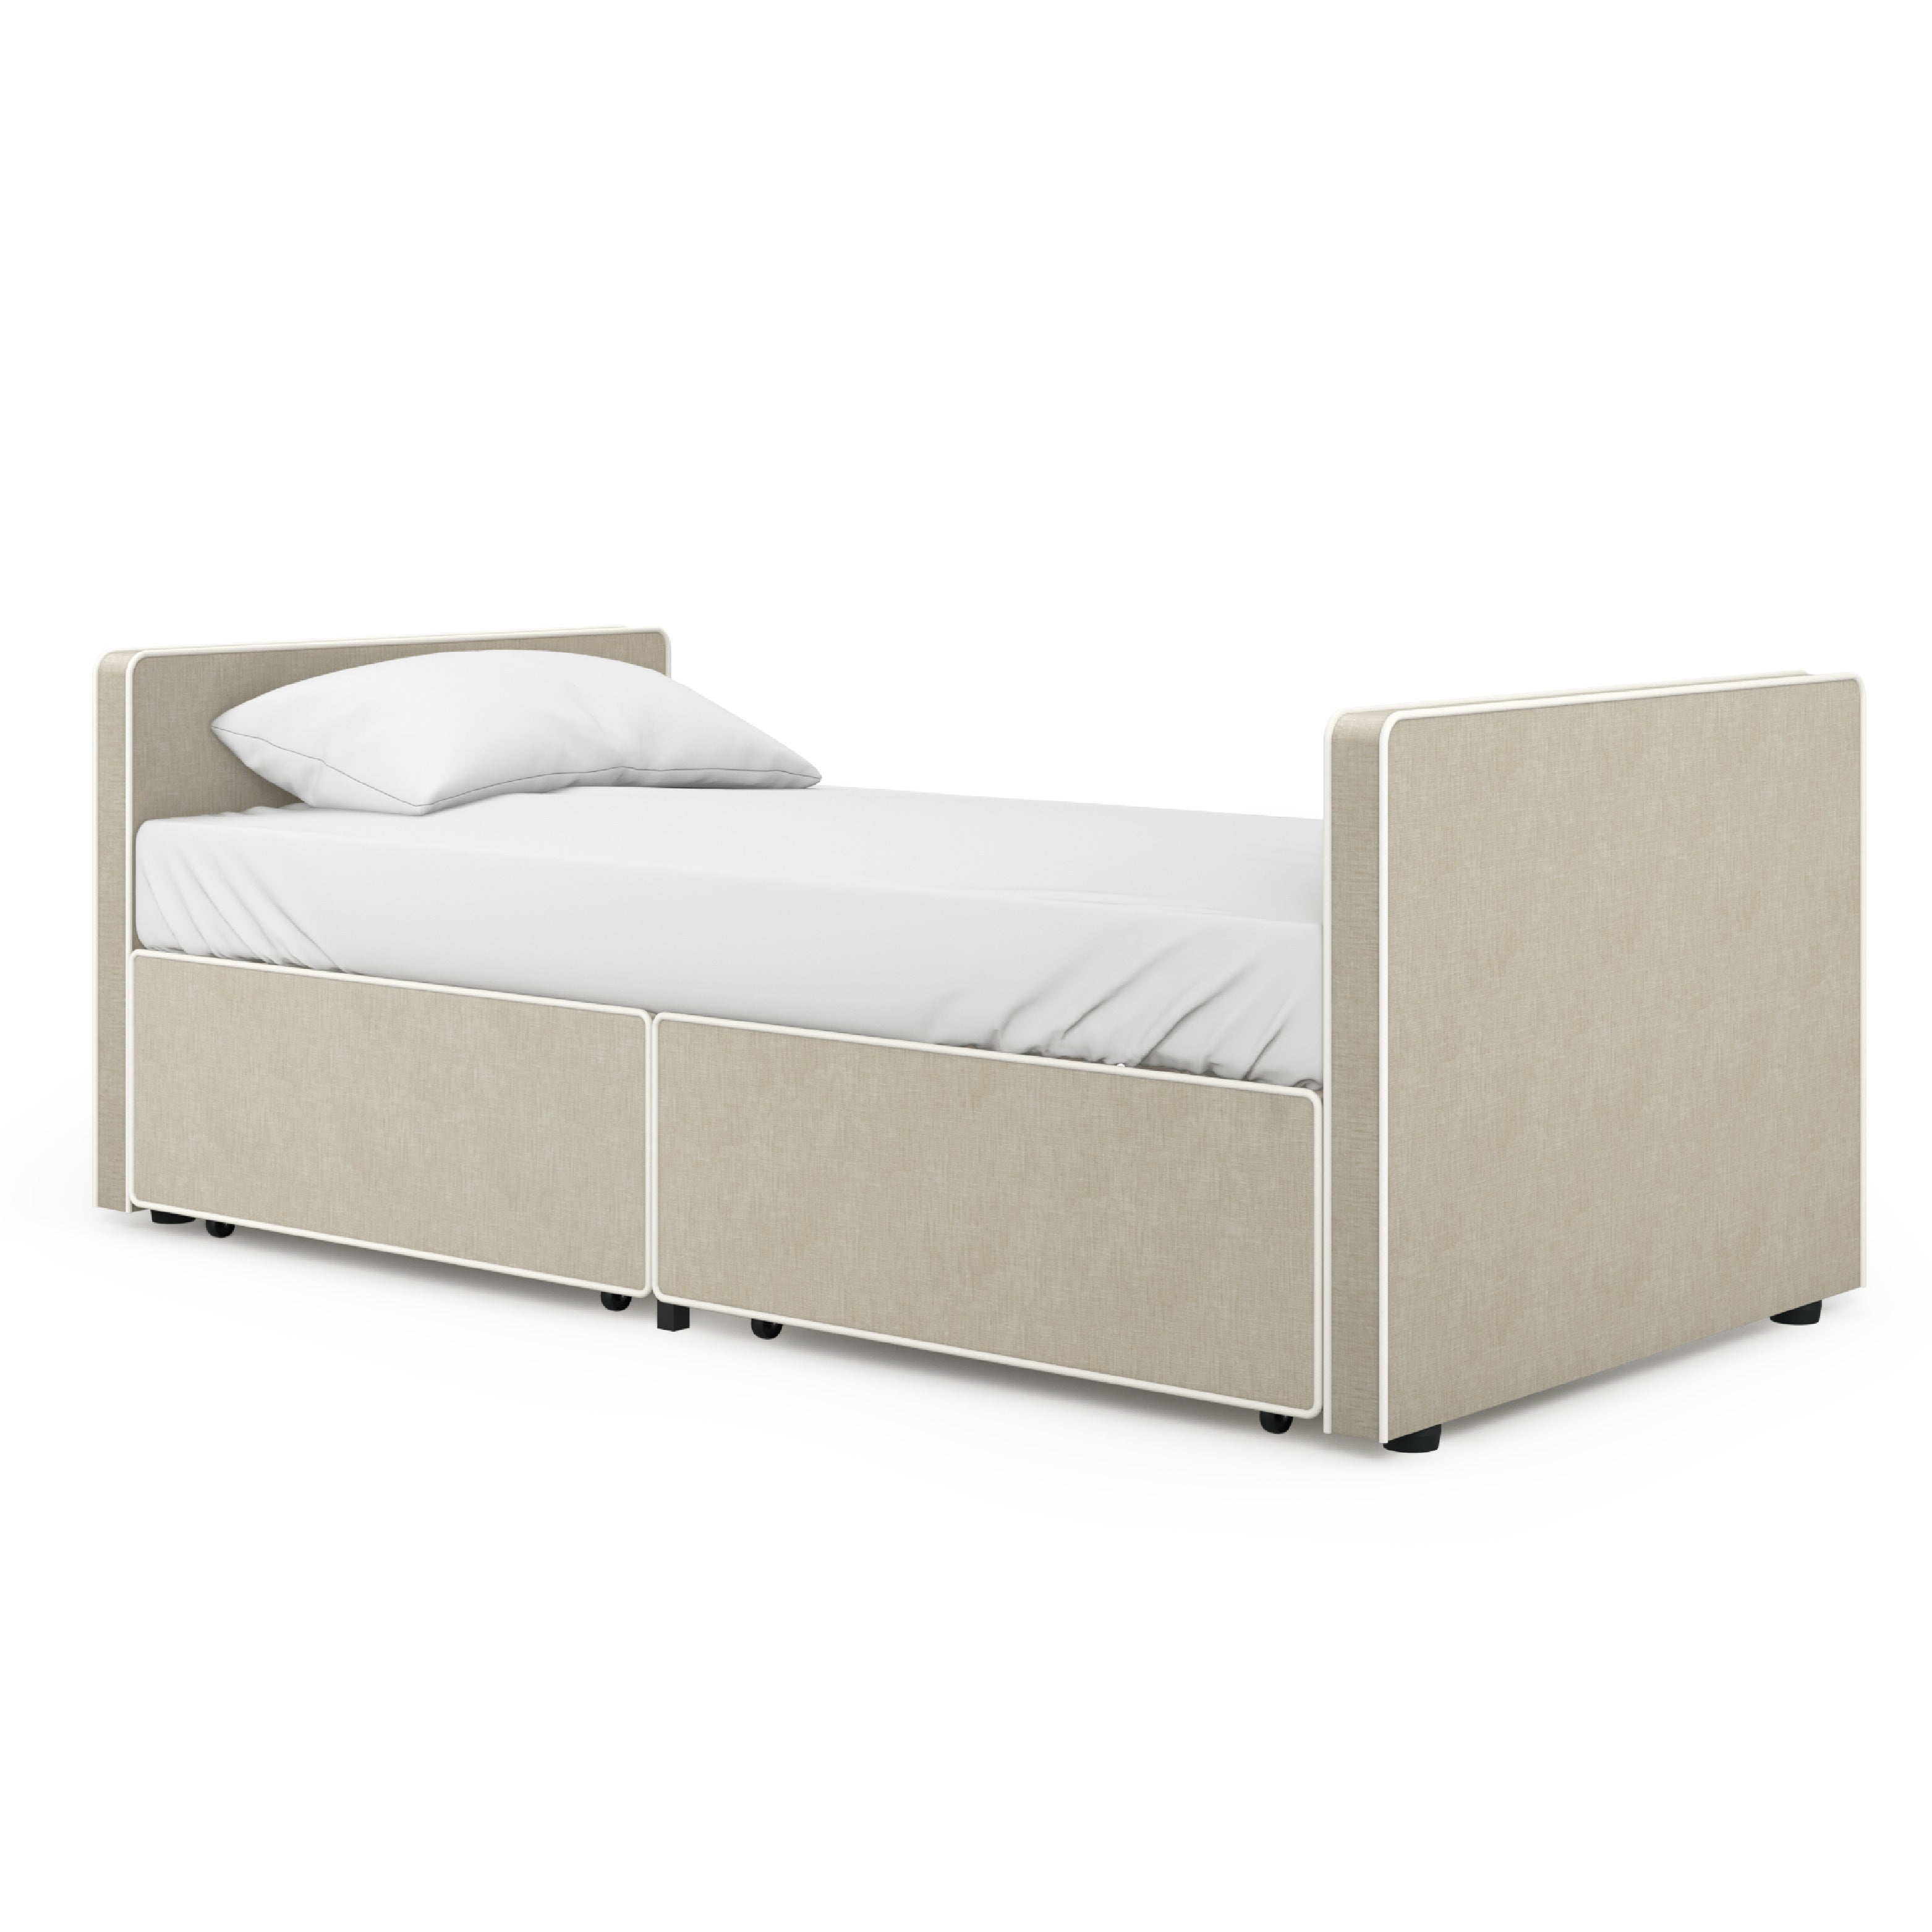 Caden Twin Daybed